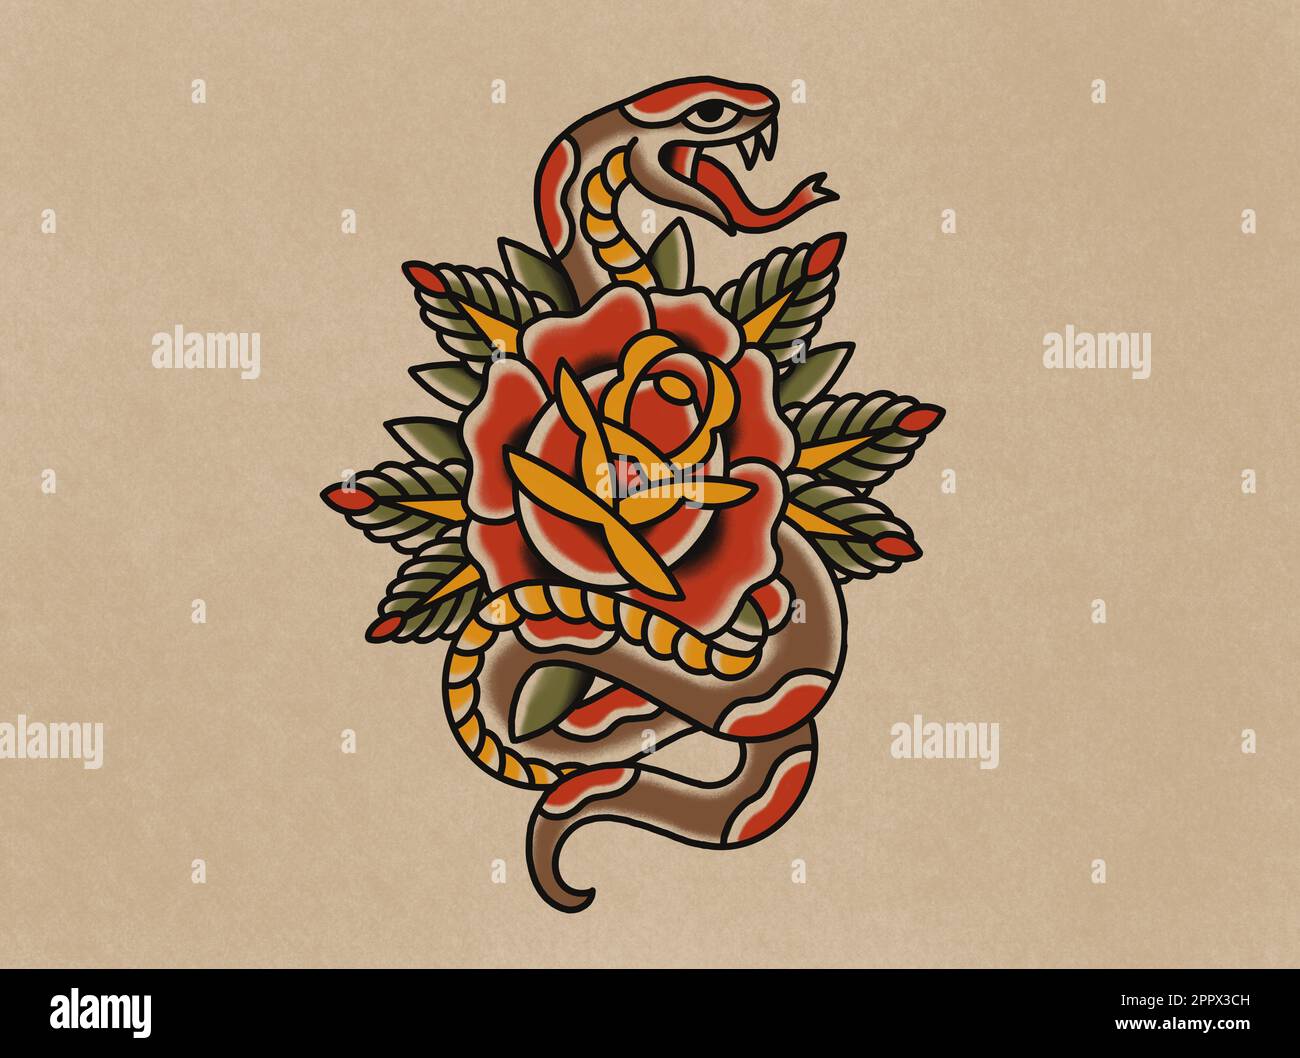 Old school tattoo art style drawing snake wrapped around rose blossom on old paper background Stock Photo